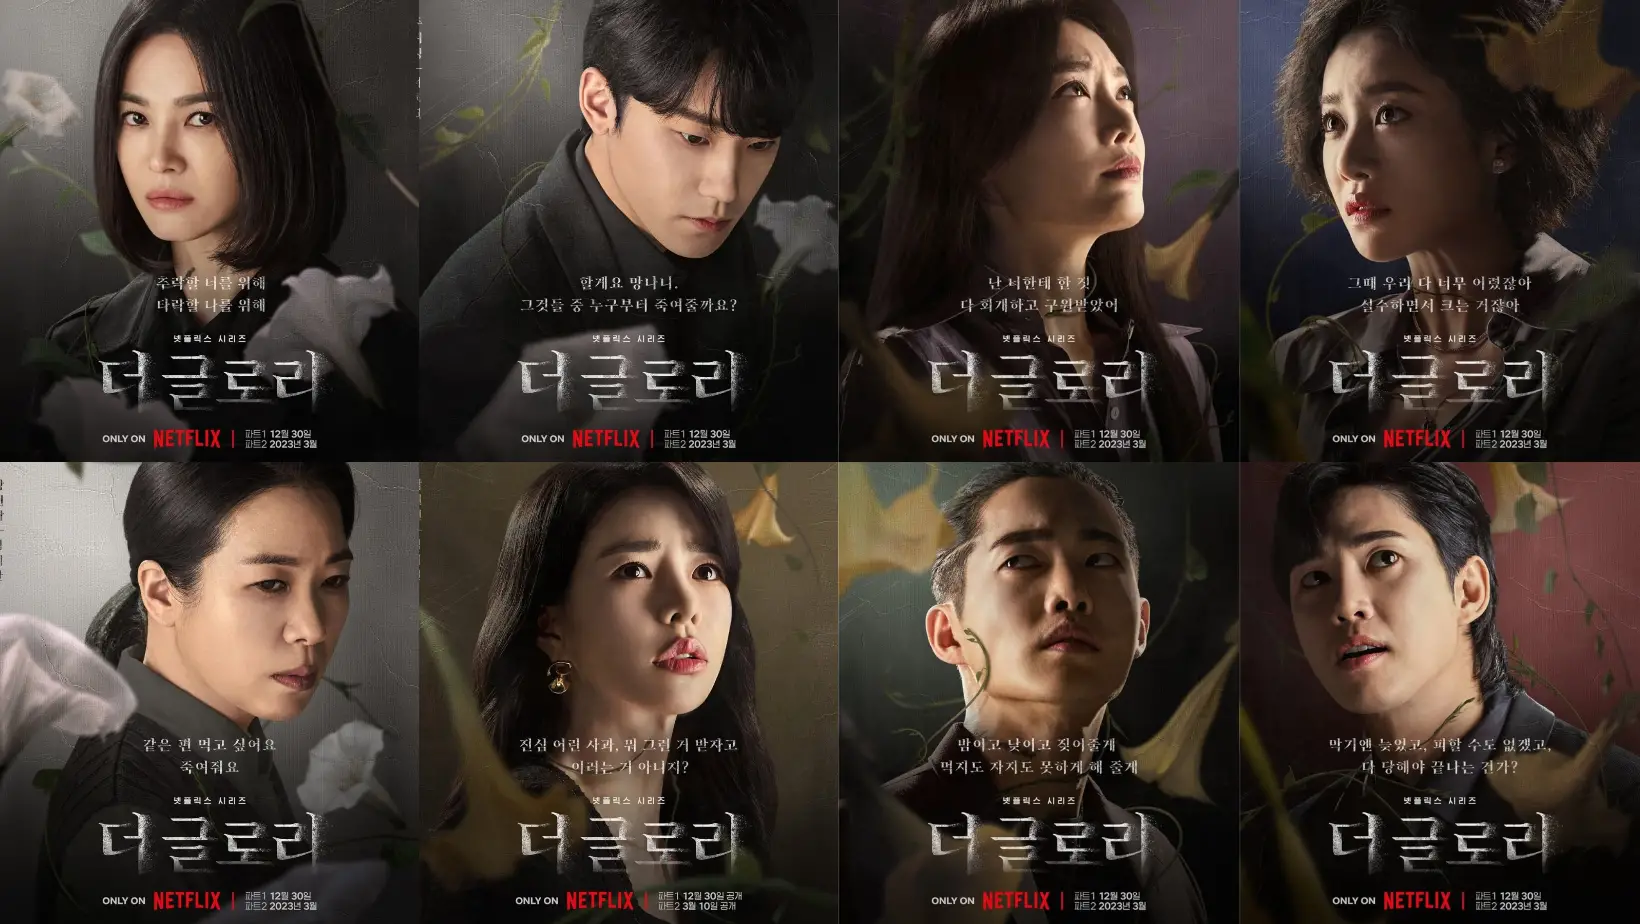 The Glory” Presents Its Cast In A Cold But Fiery Character Posters Nearing The Series' Premiere - kdramadiary